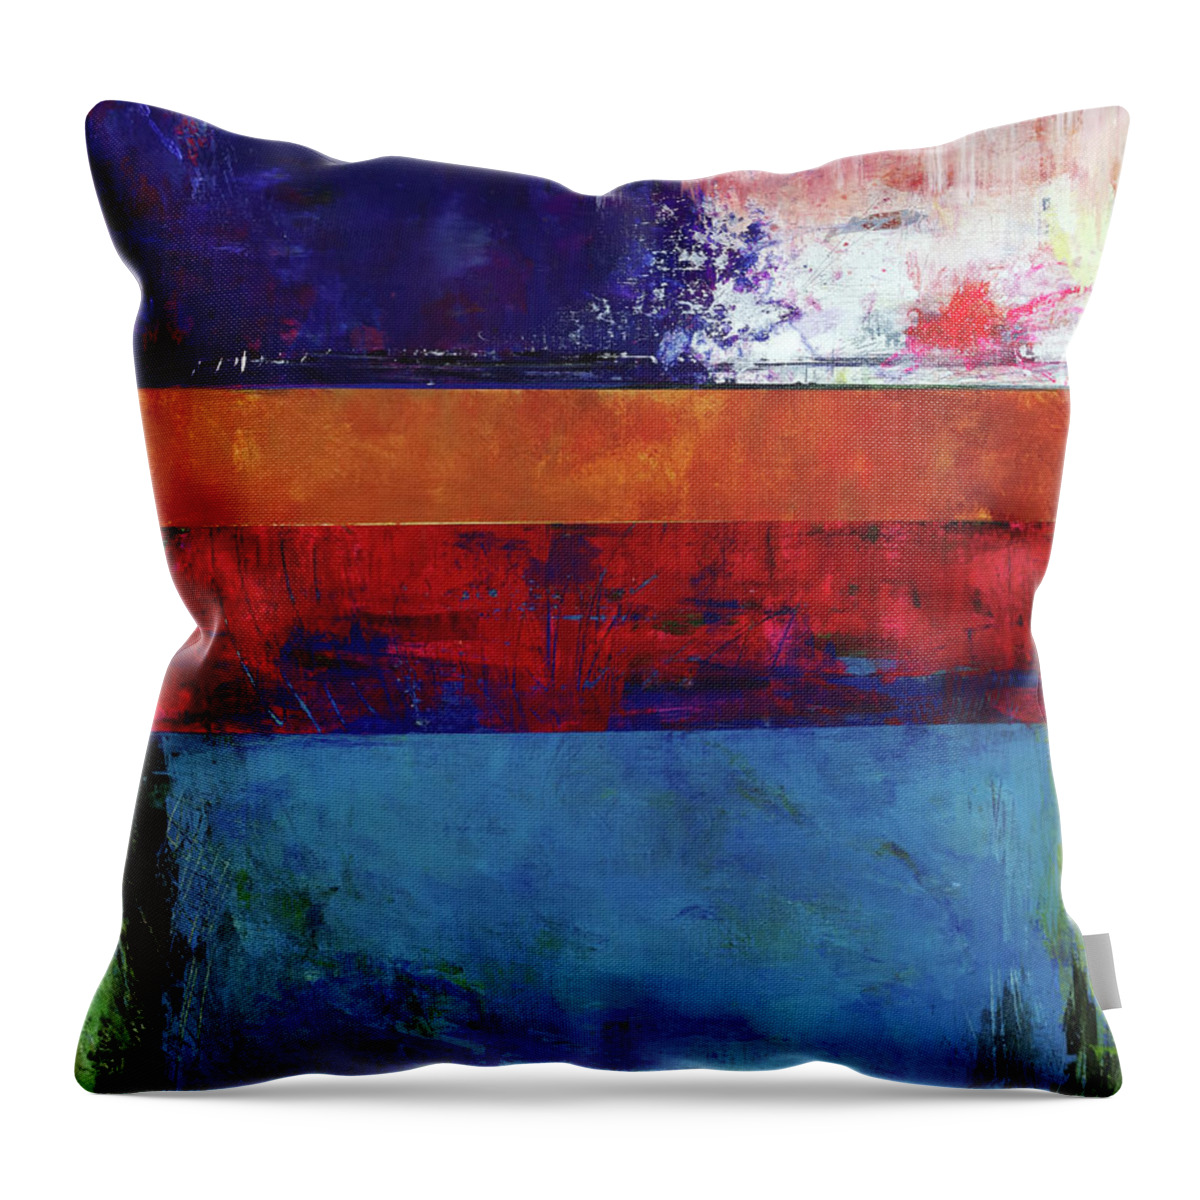  Throw Pillow featuring the mixed media Reflection by Val Zee McCune